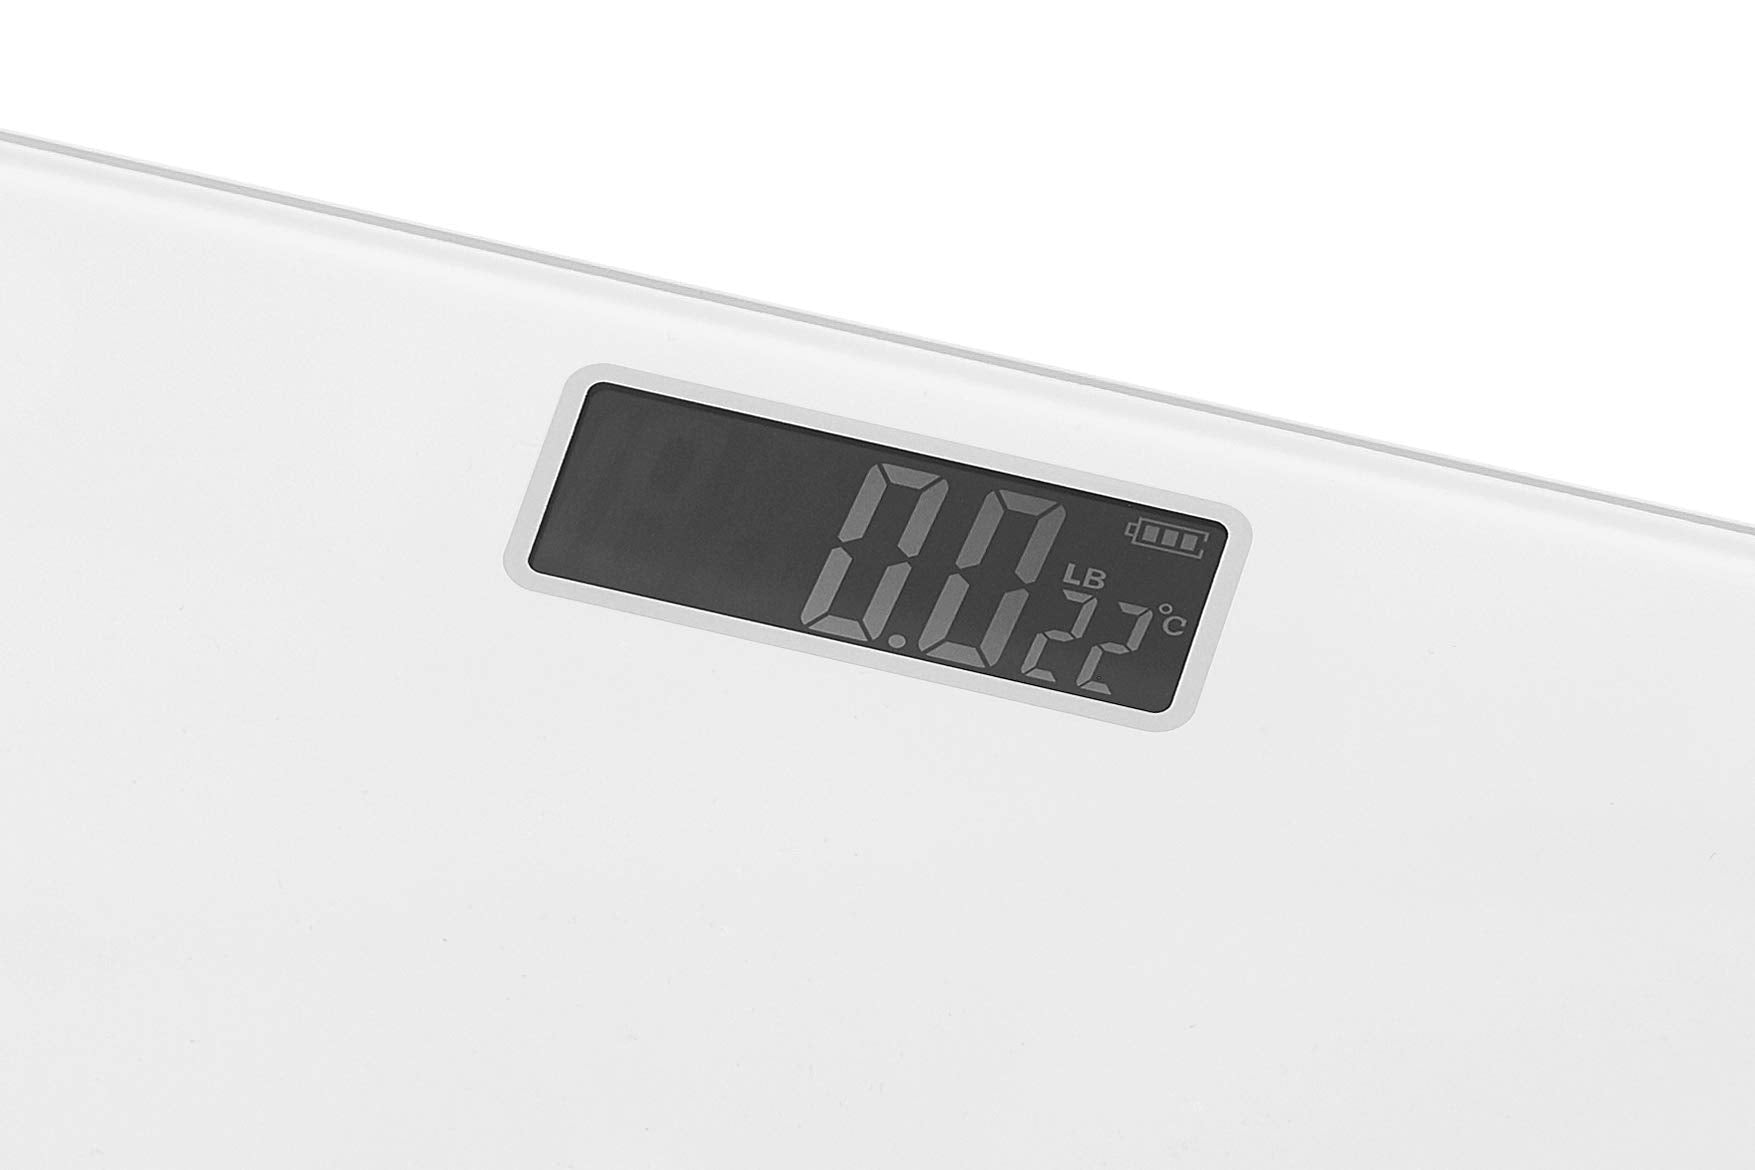 Black+Decker Battery Operated Digital Bath Scale, Large LCD Display, High Accuracy, 375 Max Pounds, Ultra-Slim Design